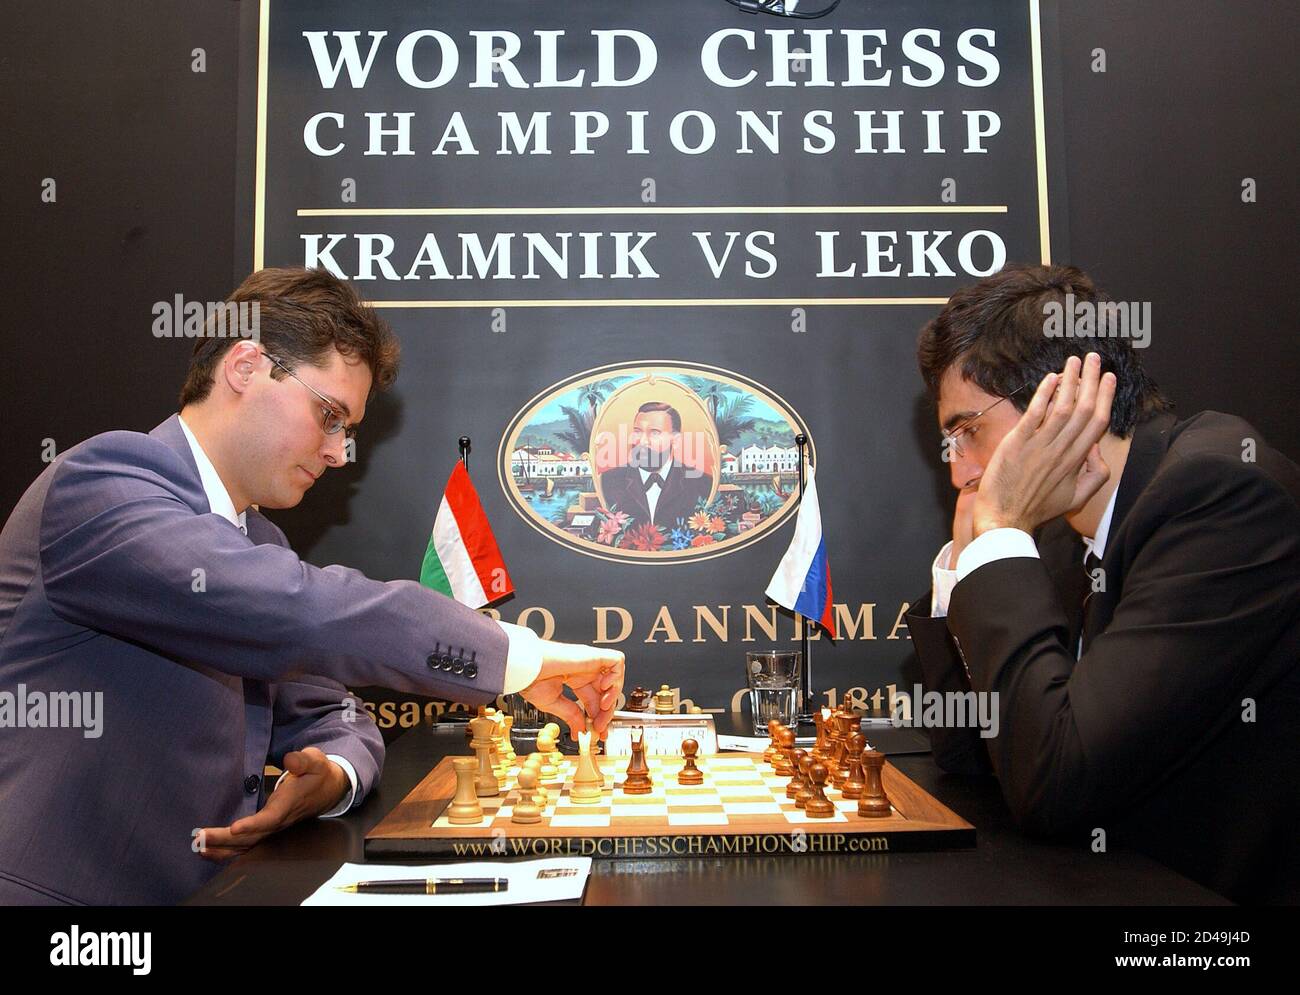 Peter Leko of Hungary moves a piece during the opening game of the World  Chess Championship in Brissago. Peter Leko (L) of Hungary moves a piece  while Classical World Chess Champion Vladimir